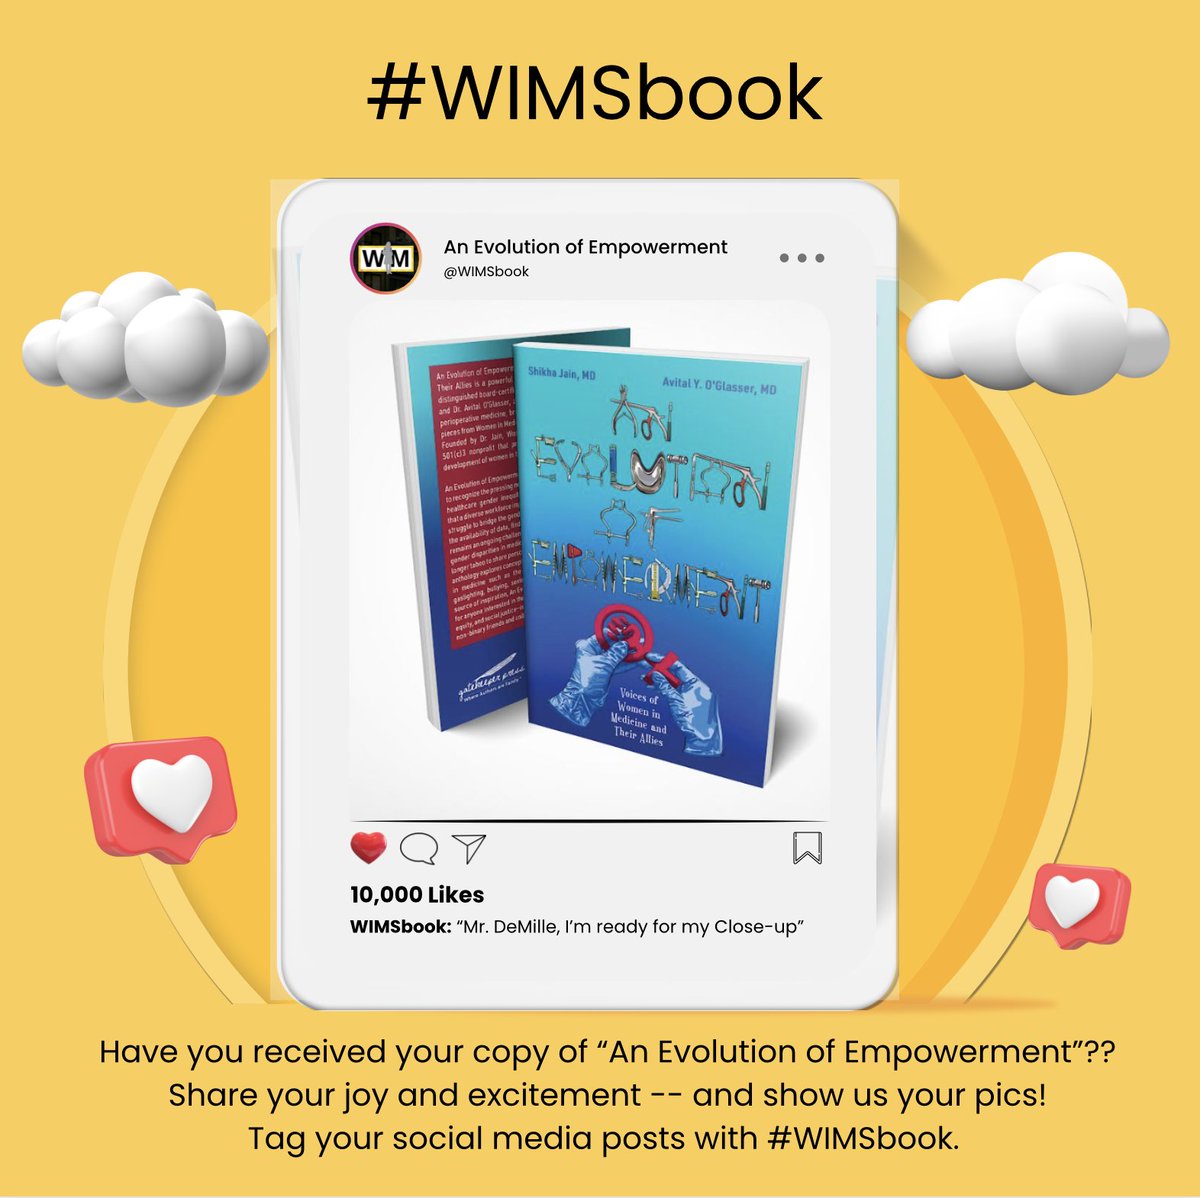 We're now in the second month of the #WIMSbook being out in the world! We hope you have enjoyed and are being inspired by the 71 empowered voices in it! Book selfies with pumpkin spice lattes, sweaters, puffy vests, and/or fall foliage welcome 😉